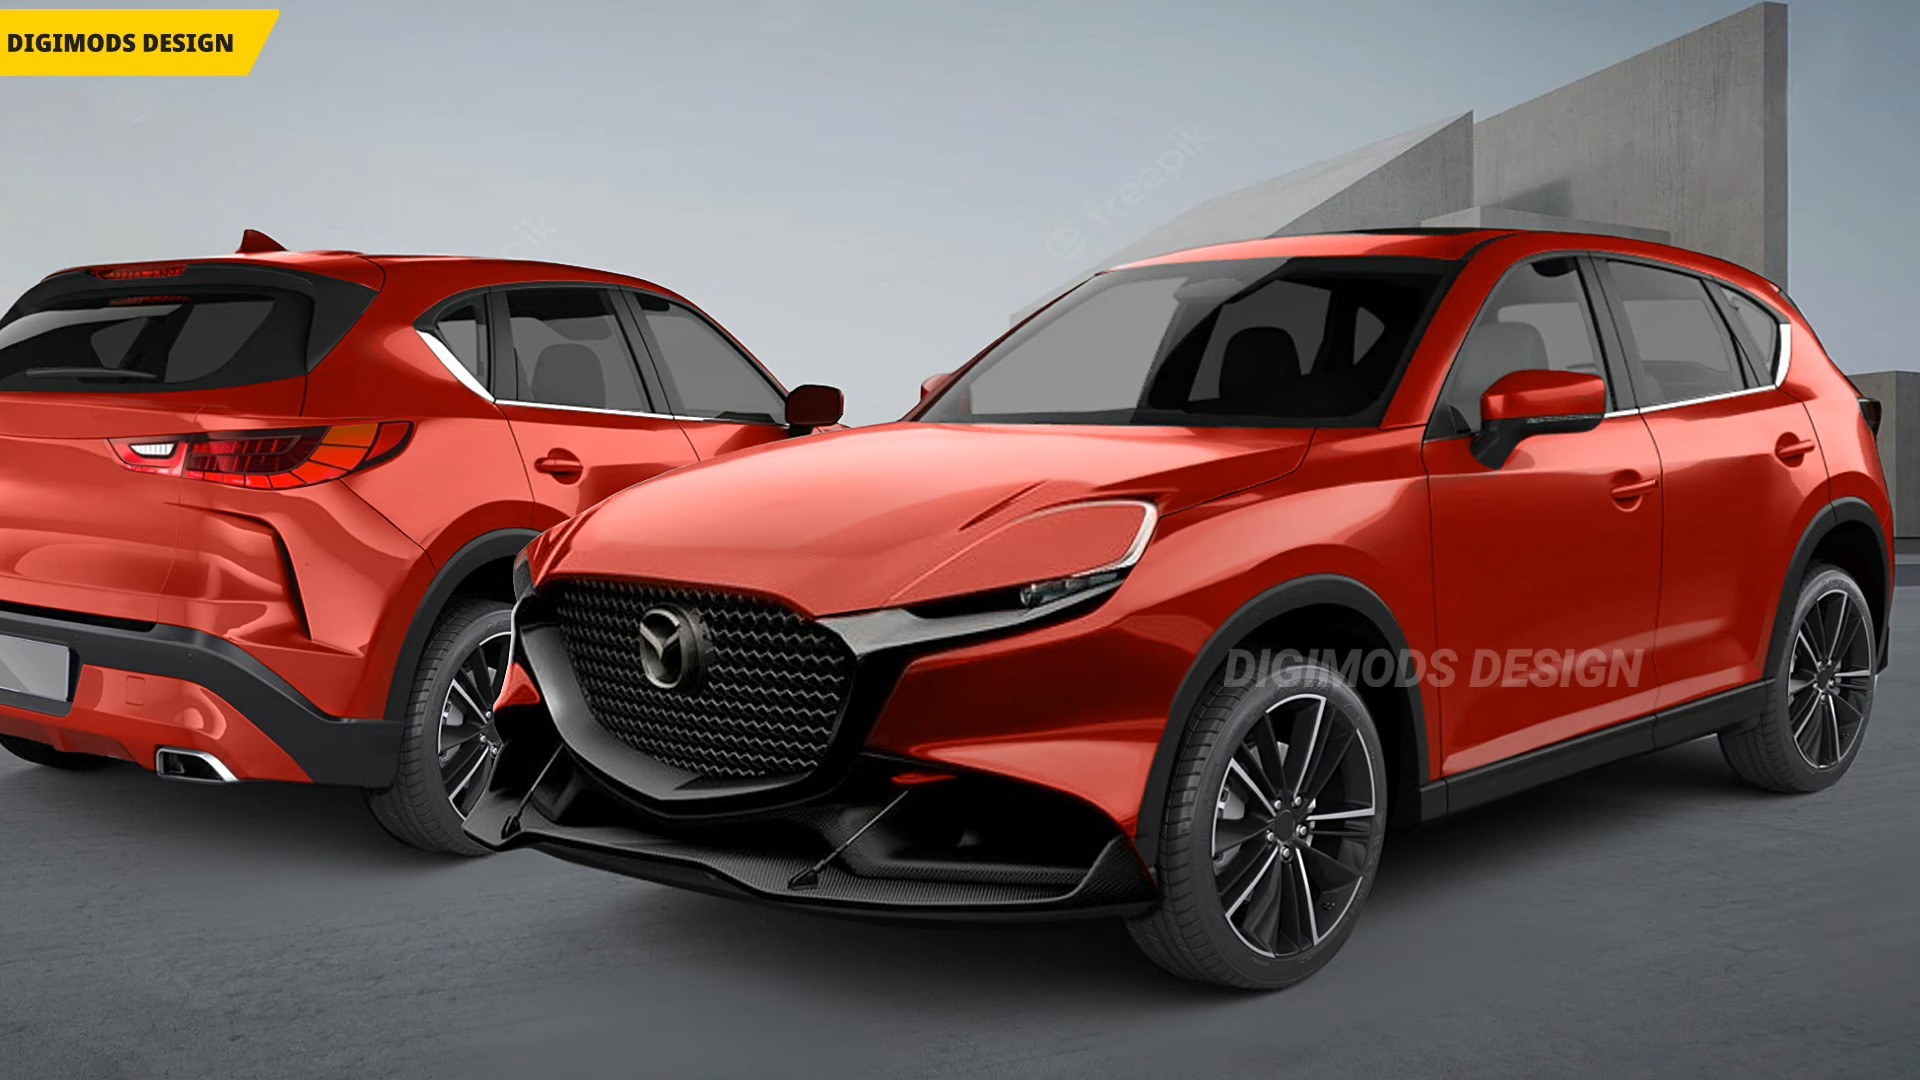 Third Gen Mazda CX5 Gets CGI FakeRevealed With 'Mazdaspeed' Cues